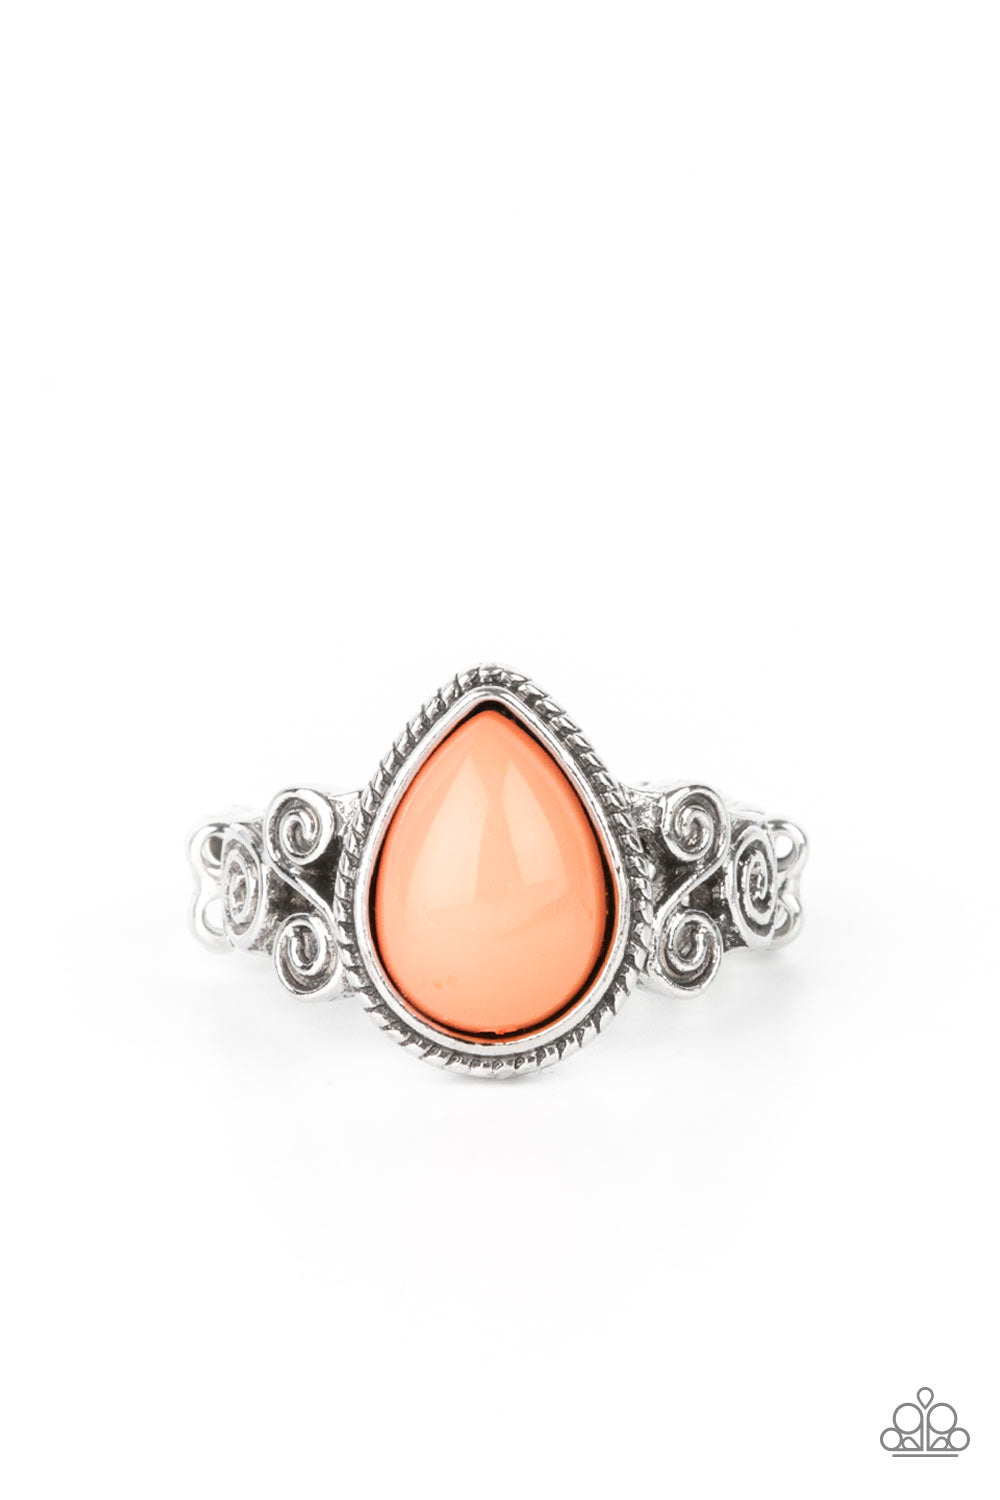 PRE-ORDER - Paparazzi Dreamy Droplets - Orange Coral - Ring - $5 Jewelry with Ashley Swint